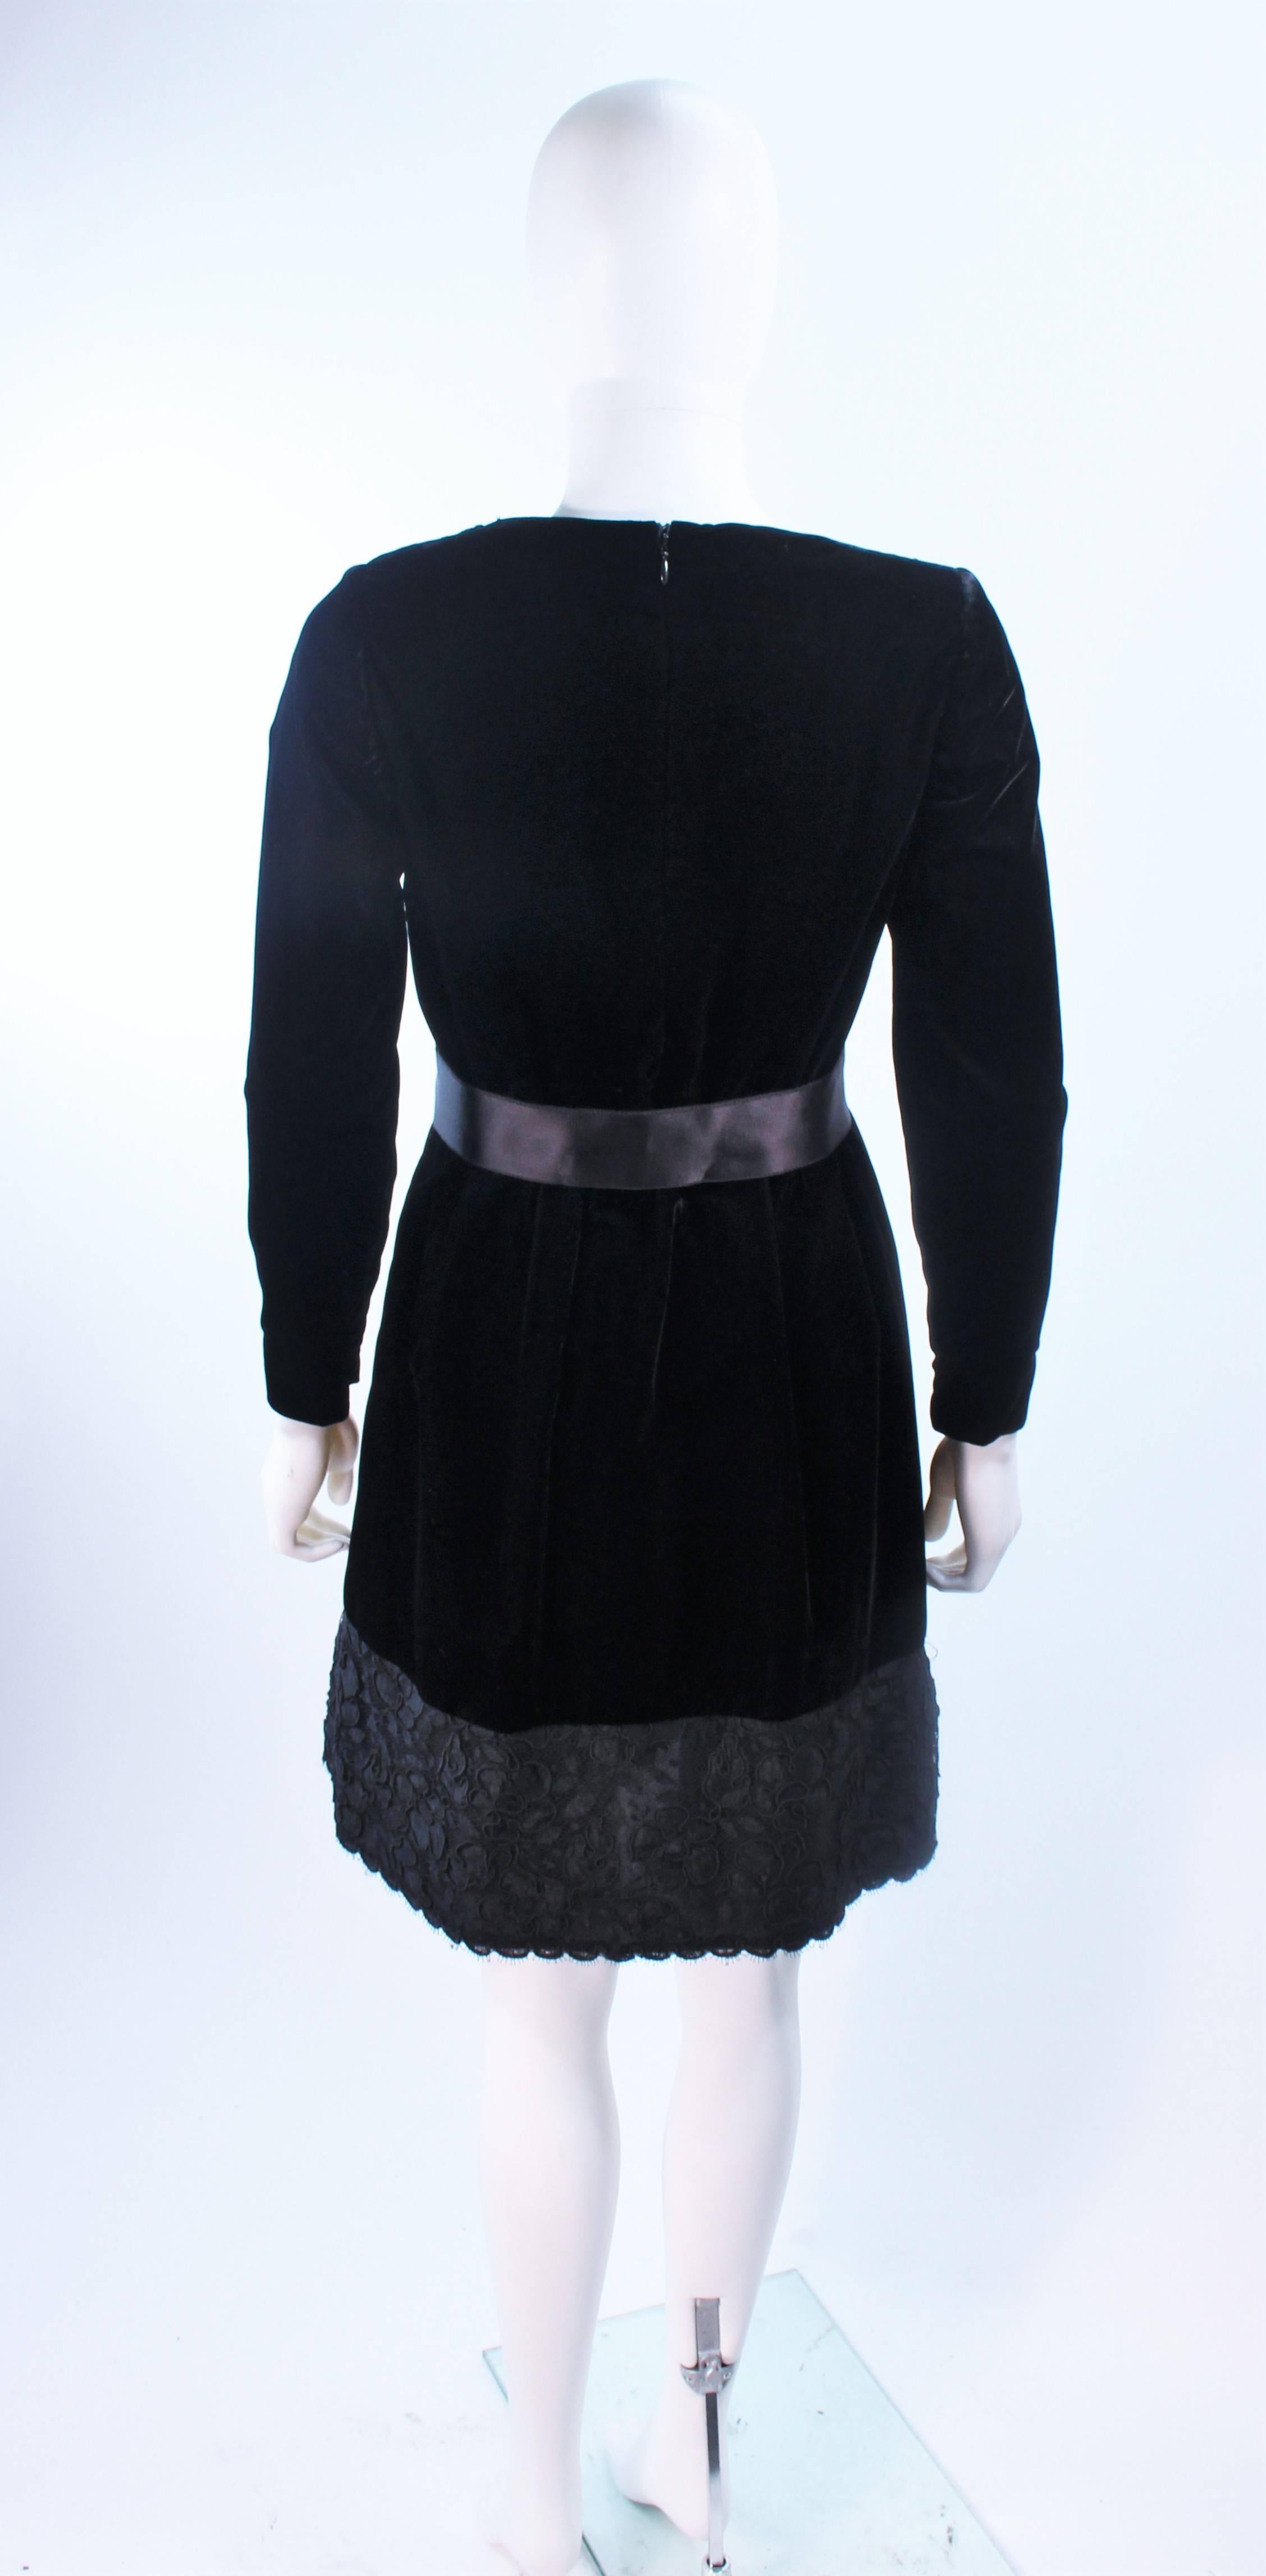 GIVENCHY Black Velvet Cocktail Dress with Lace Trim and Satin Belt Size 4 For Sale 1